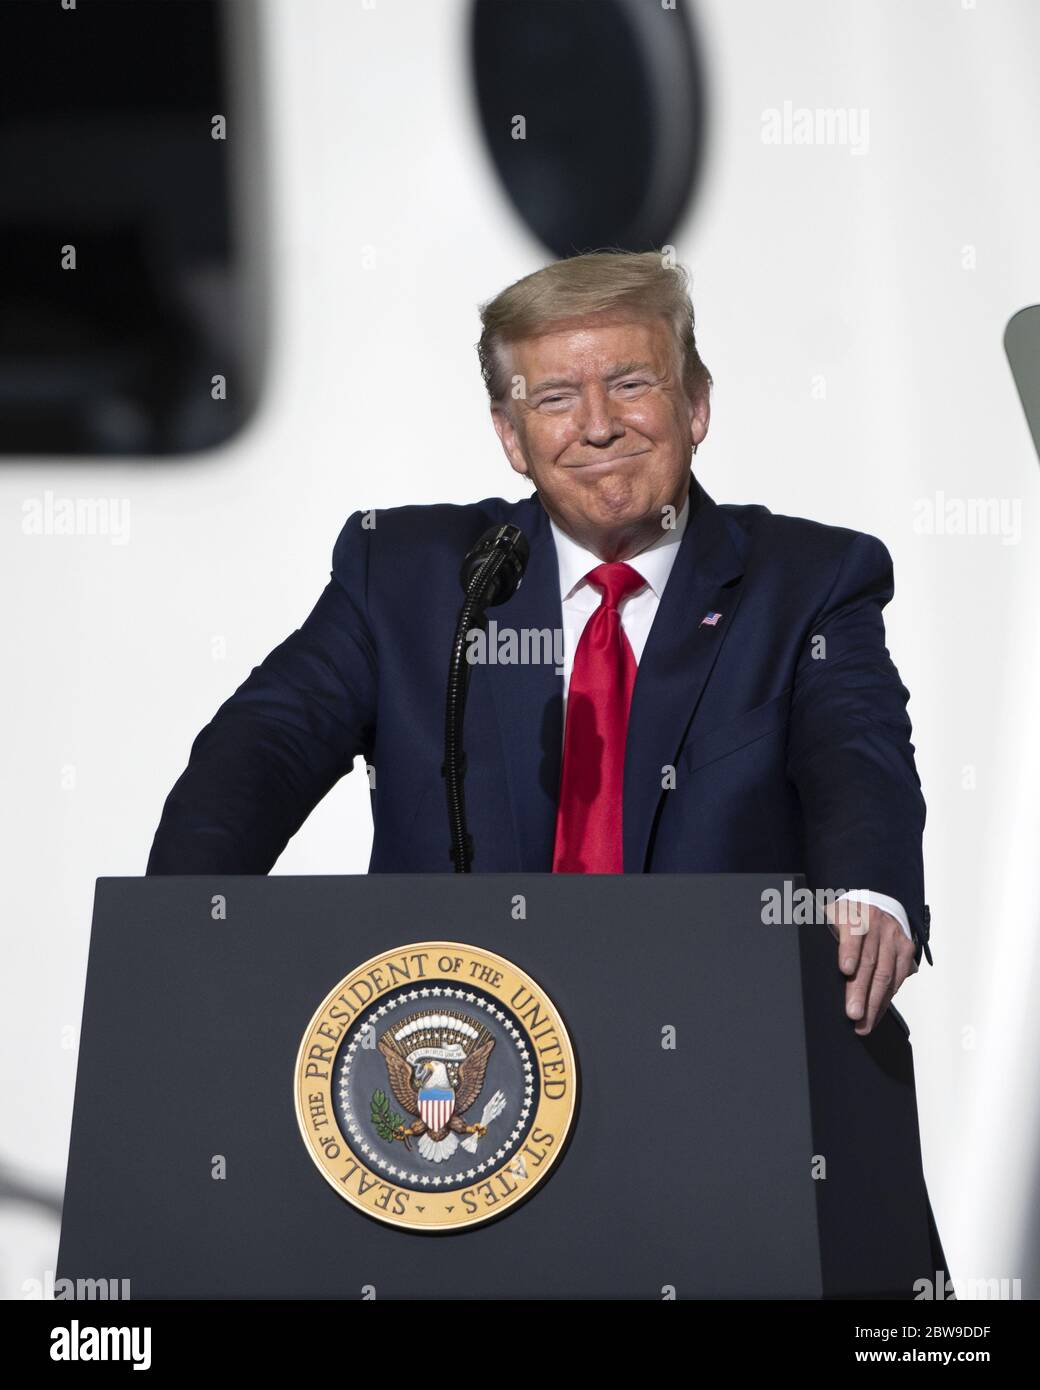 Kennedy Space Center, United States. 30th May, 2020. President Donald Trump makes remarks following the launch of the first crewed NASA/SpaceX mission from the Kennedy Space Center on Saturday, May 30, 2020. Photo by Joe Marino/UPI Credit: UPI/Alamy Live News Stock Photo